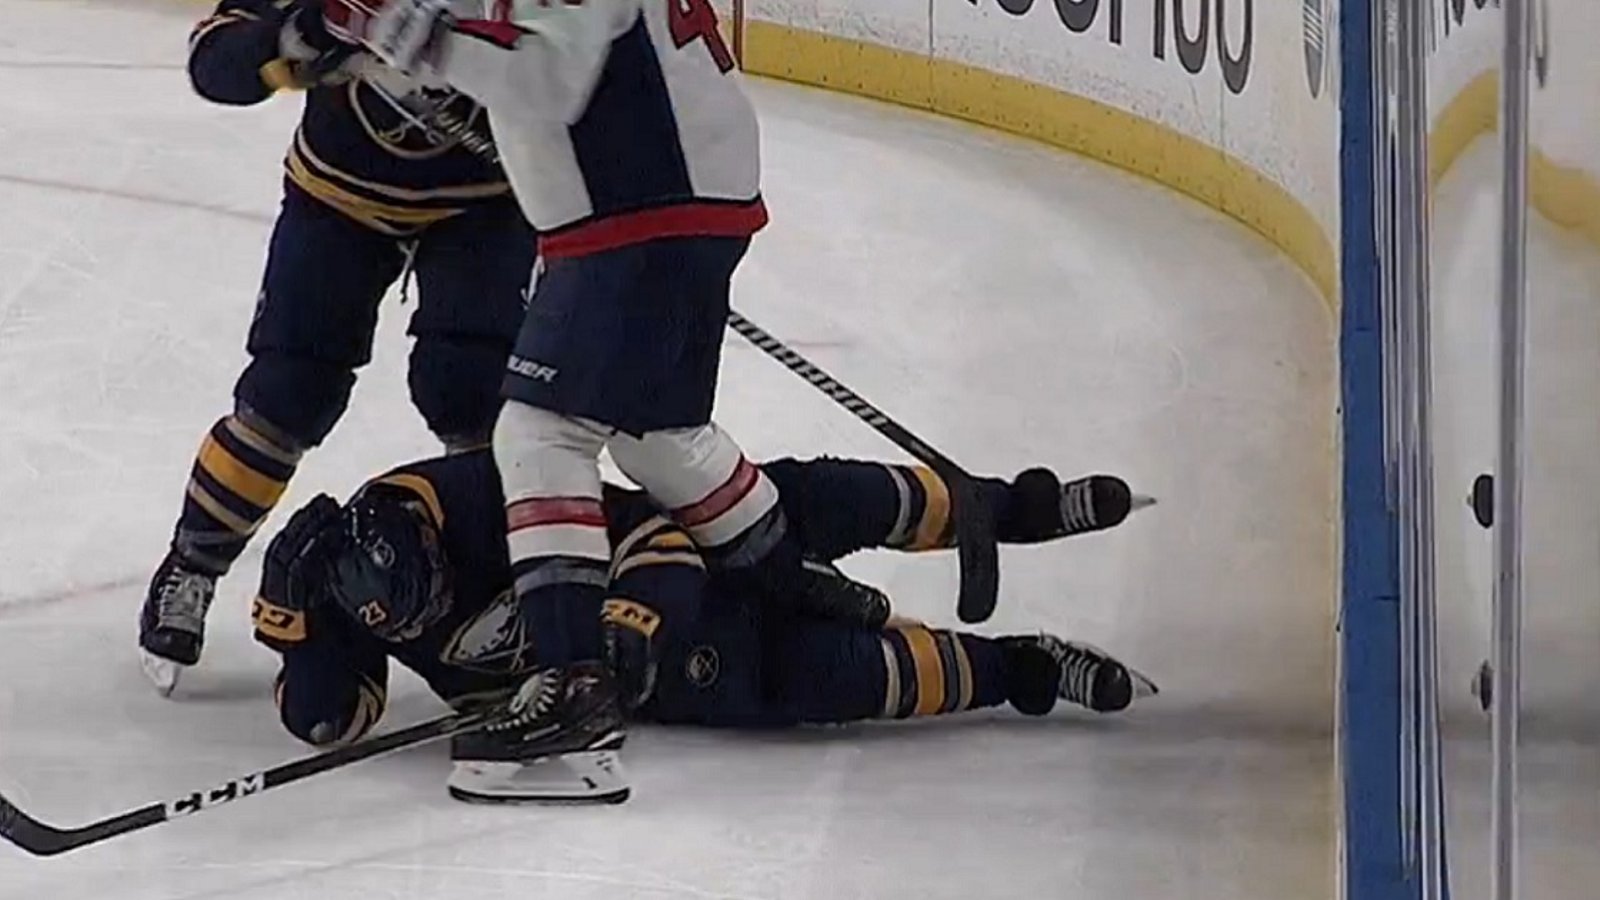 Tom Wilson crushes Reinhart with a huge hit, then beats up his teammate.